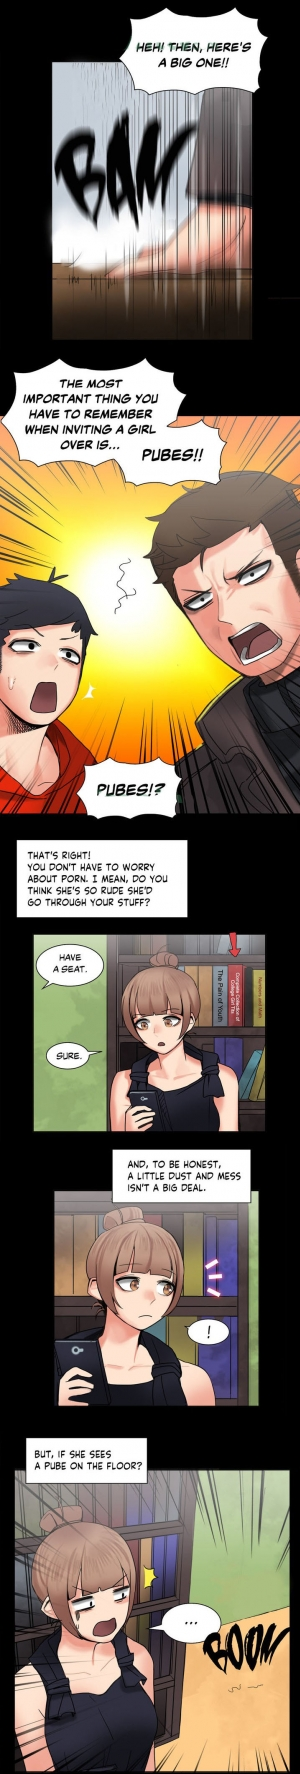 [Gaehoju, Gunnermul] The Girl That Got Stuck in the Wall Ch.11/11 [COMPLETED] [English] [Hentai Universe] - Page 54